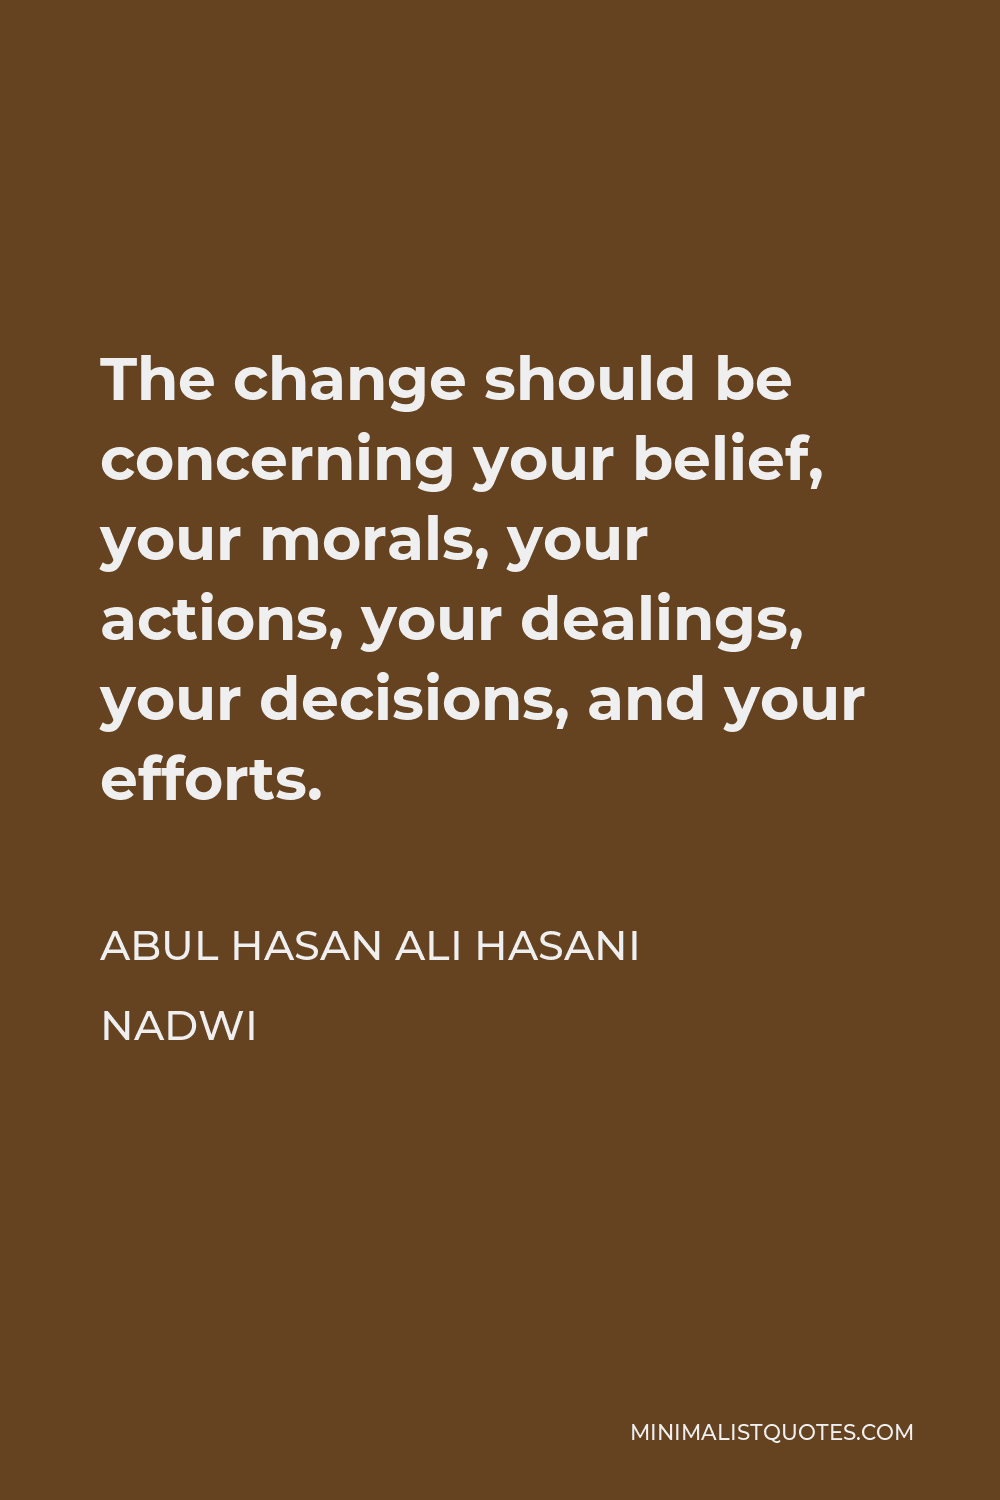 Abul Hasan Ali Hasani Nadwi Quote - The change should be concerning your belief, your morals, your actions, your dealings, your decisions, and your efforts.